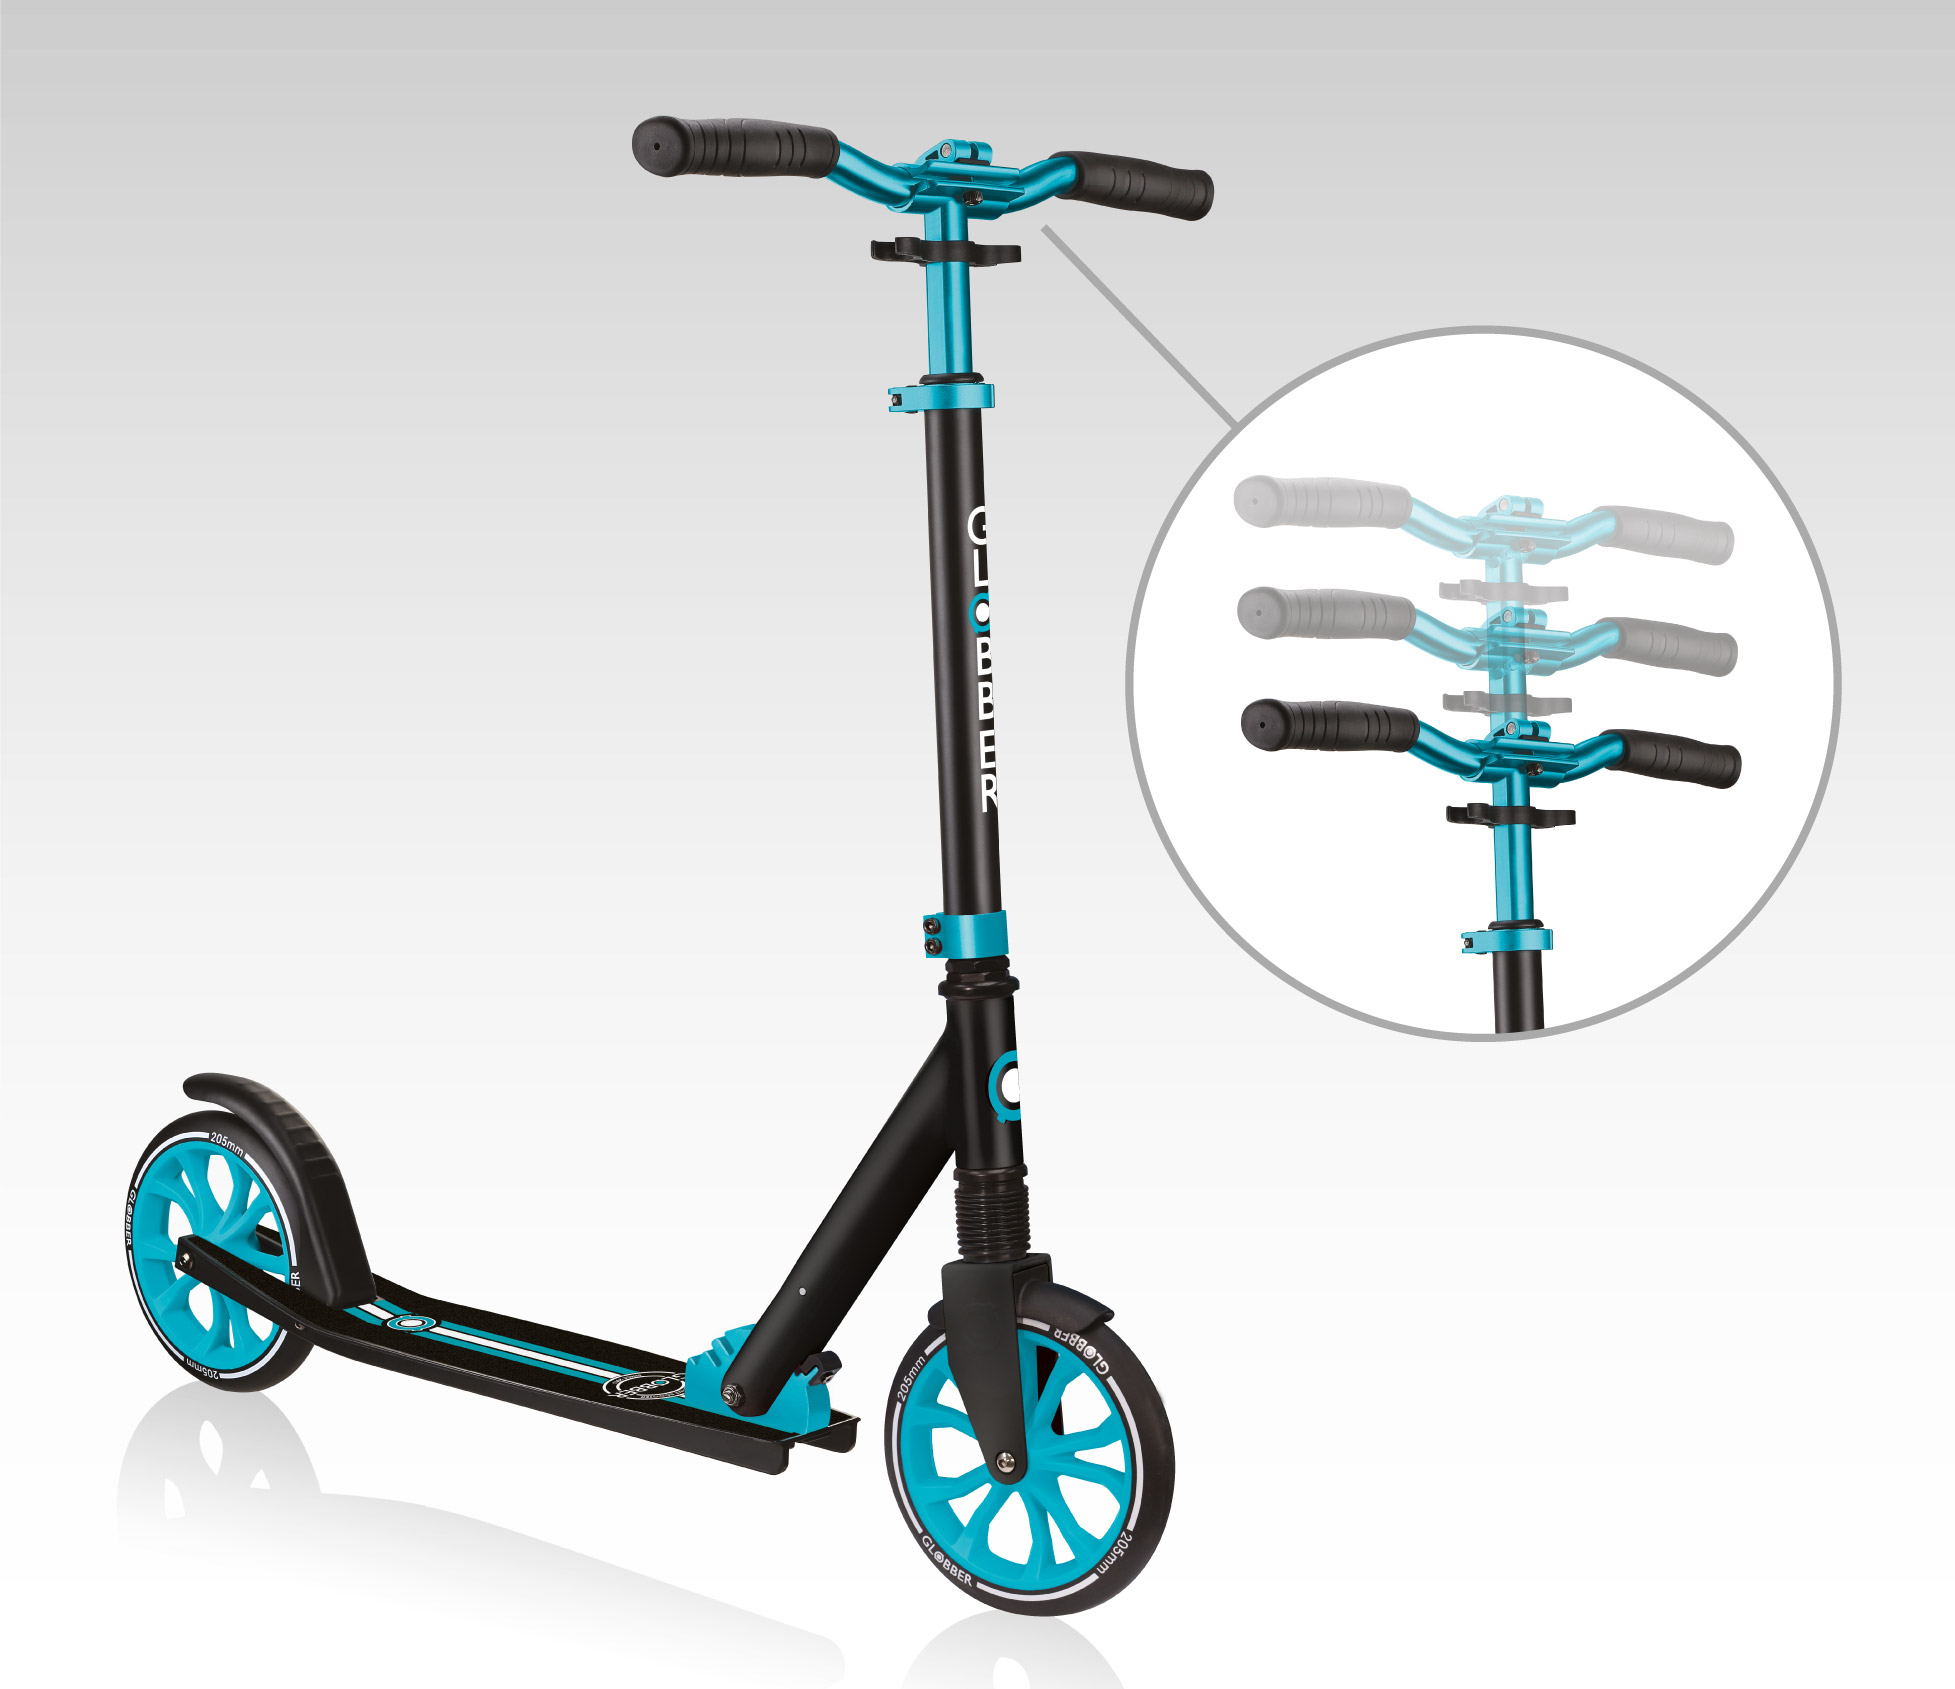 NL 205 big wheel scooter with 3-height adjustable T-bar